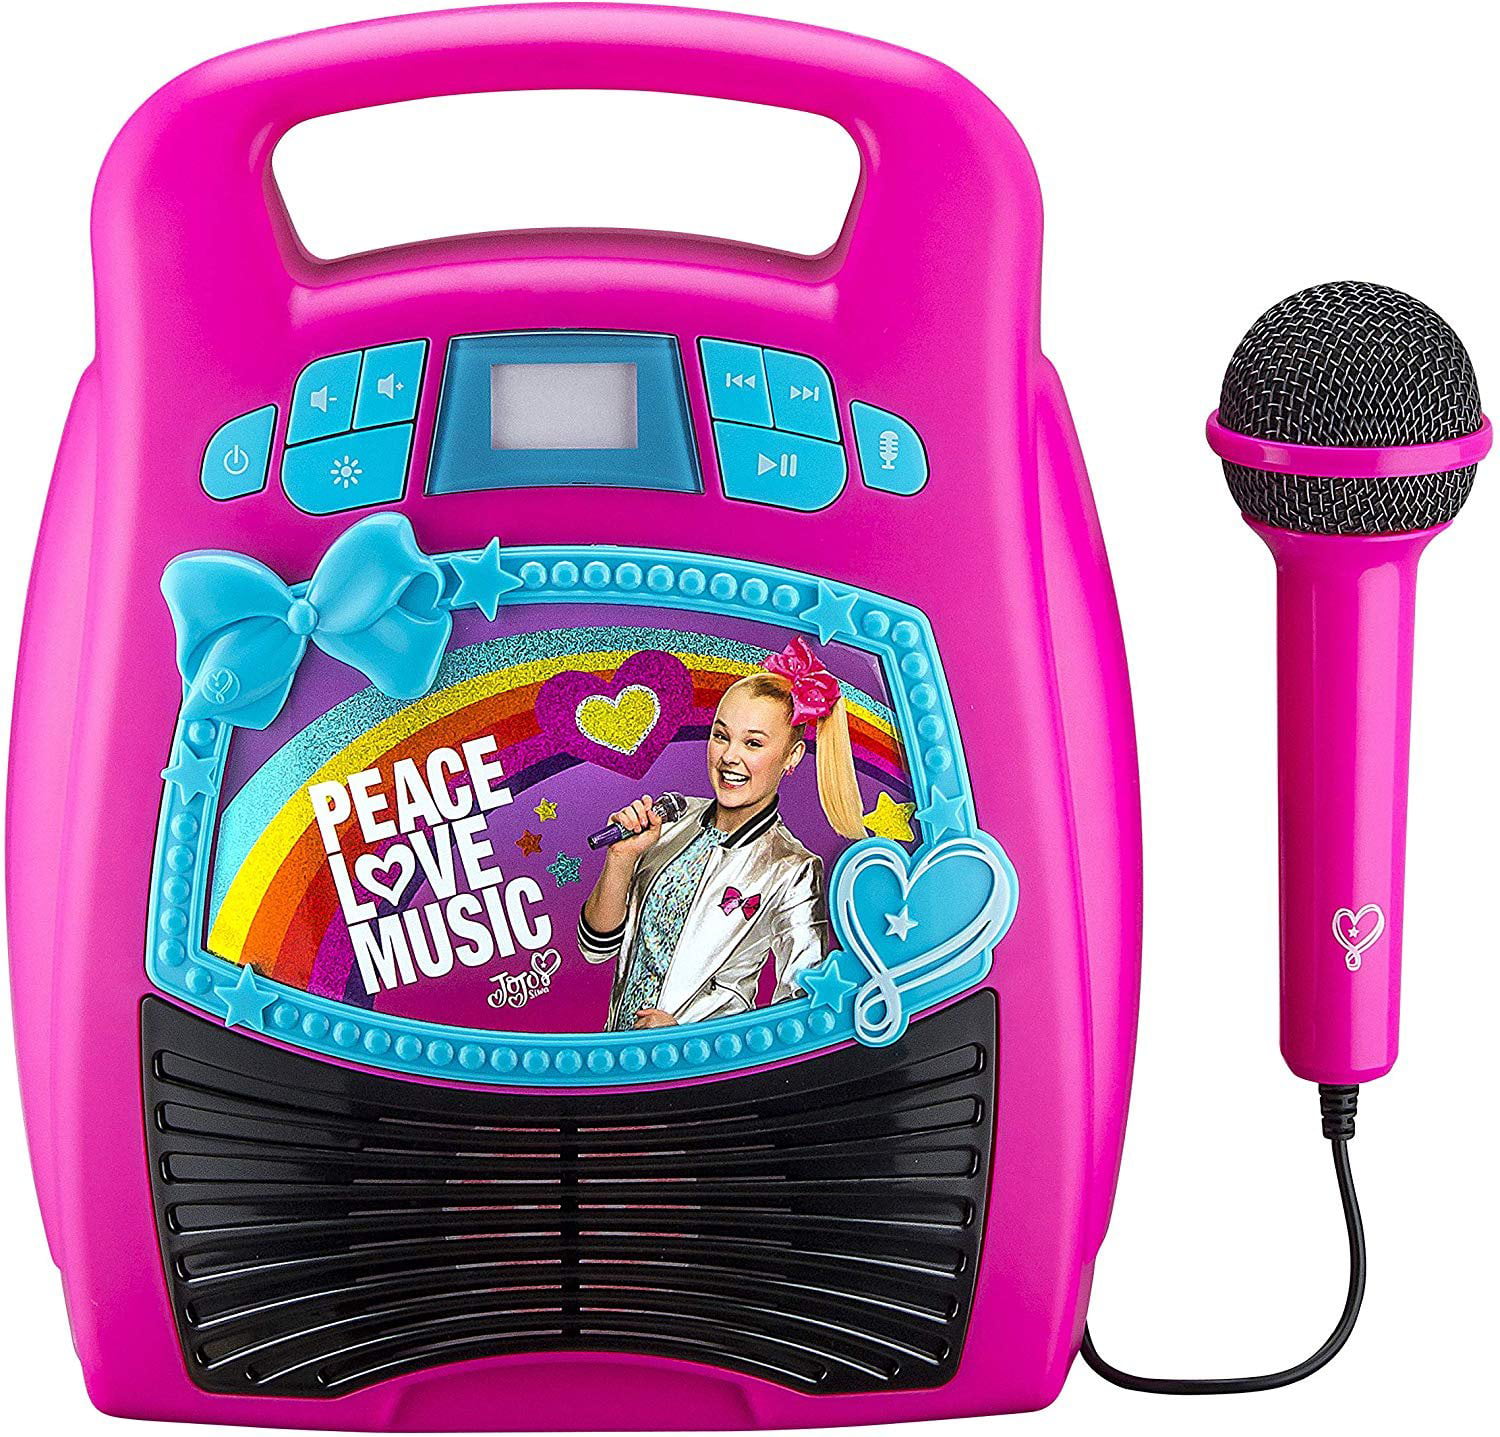 eKids Disney Princess Bluetooth Portable MP3 Karaoke Machine Player Light Show Store Hours of Music Built in Memory Sing Along Using Real Working Microphone USB Port Expand Content 